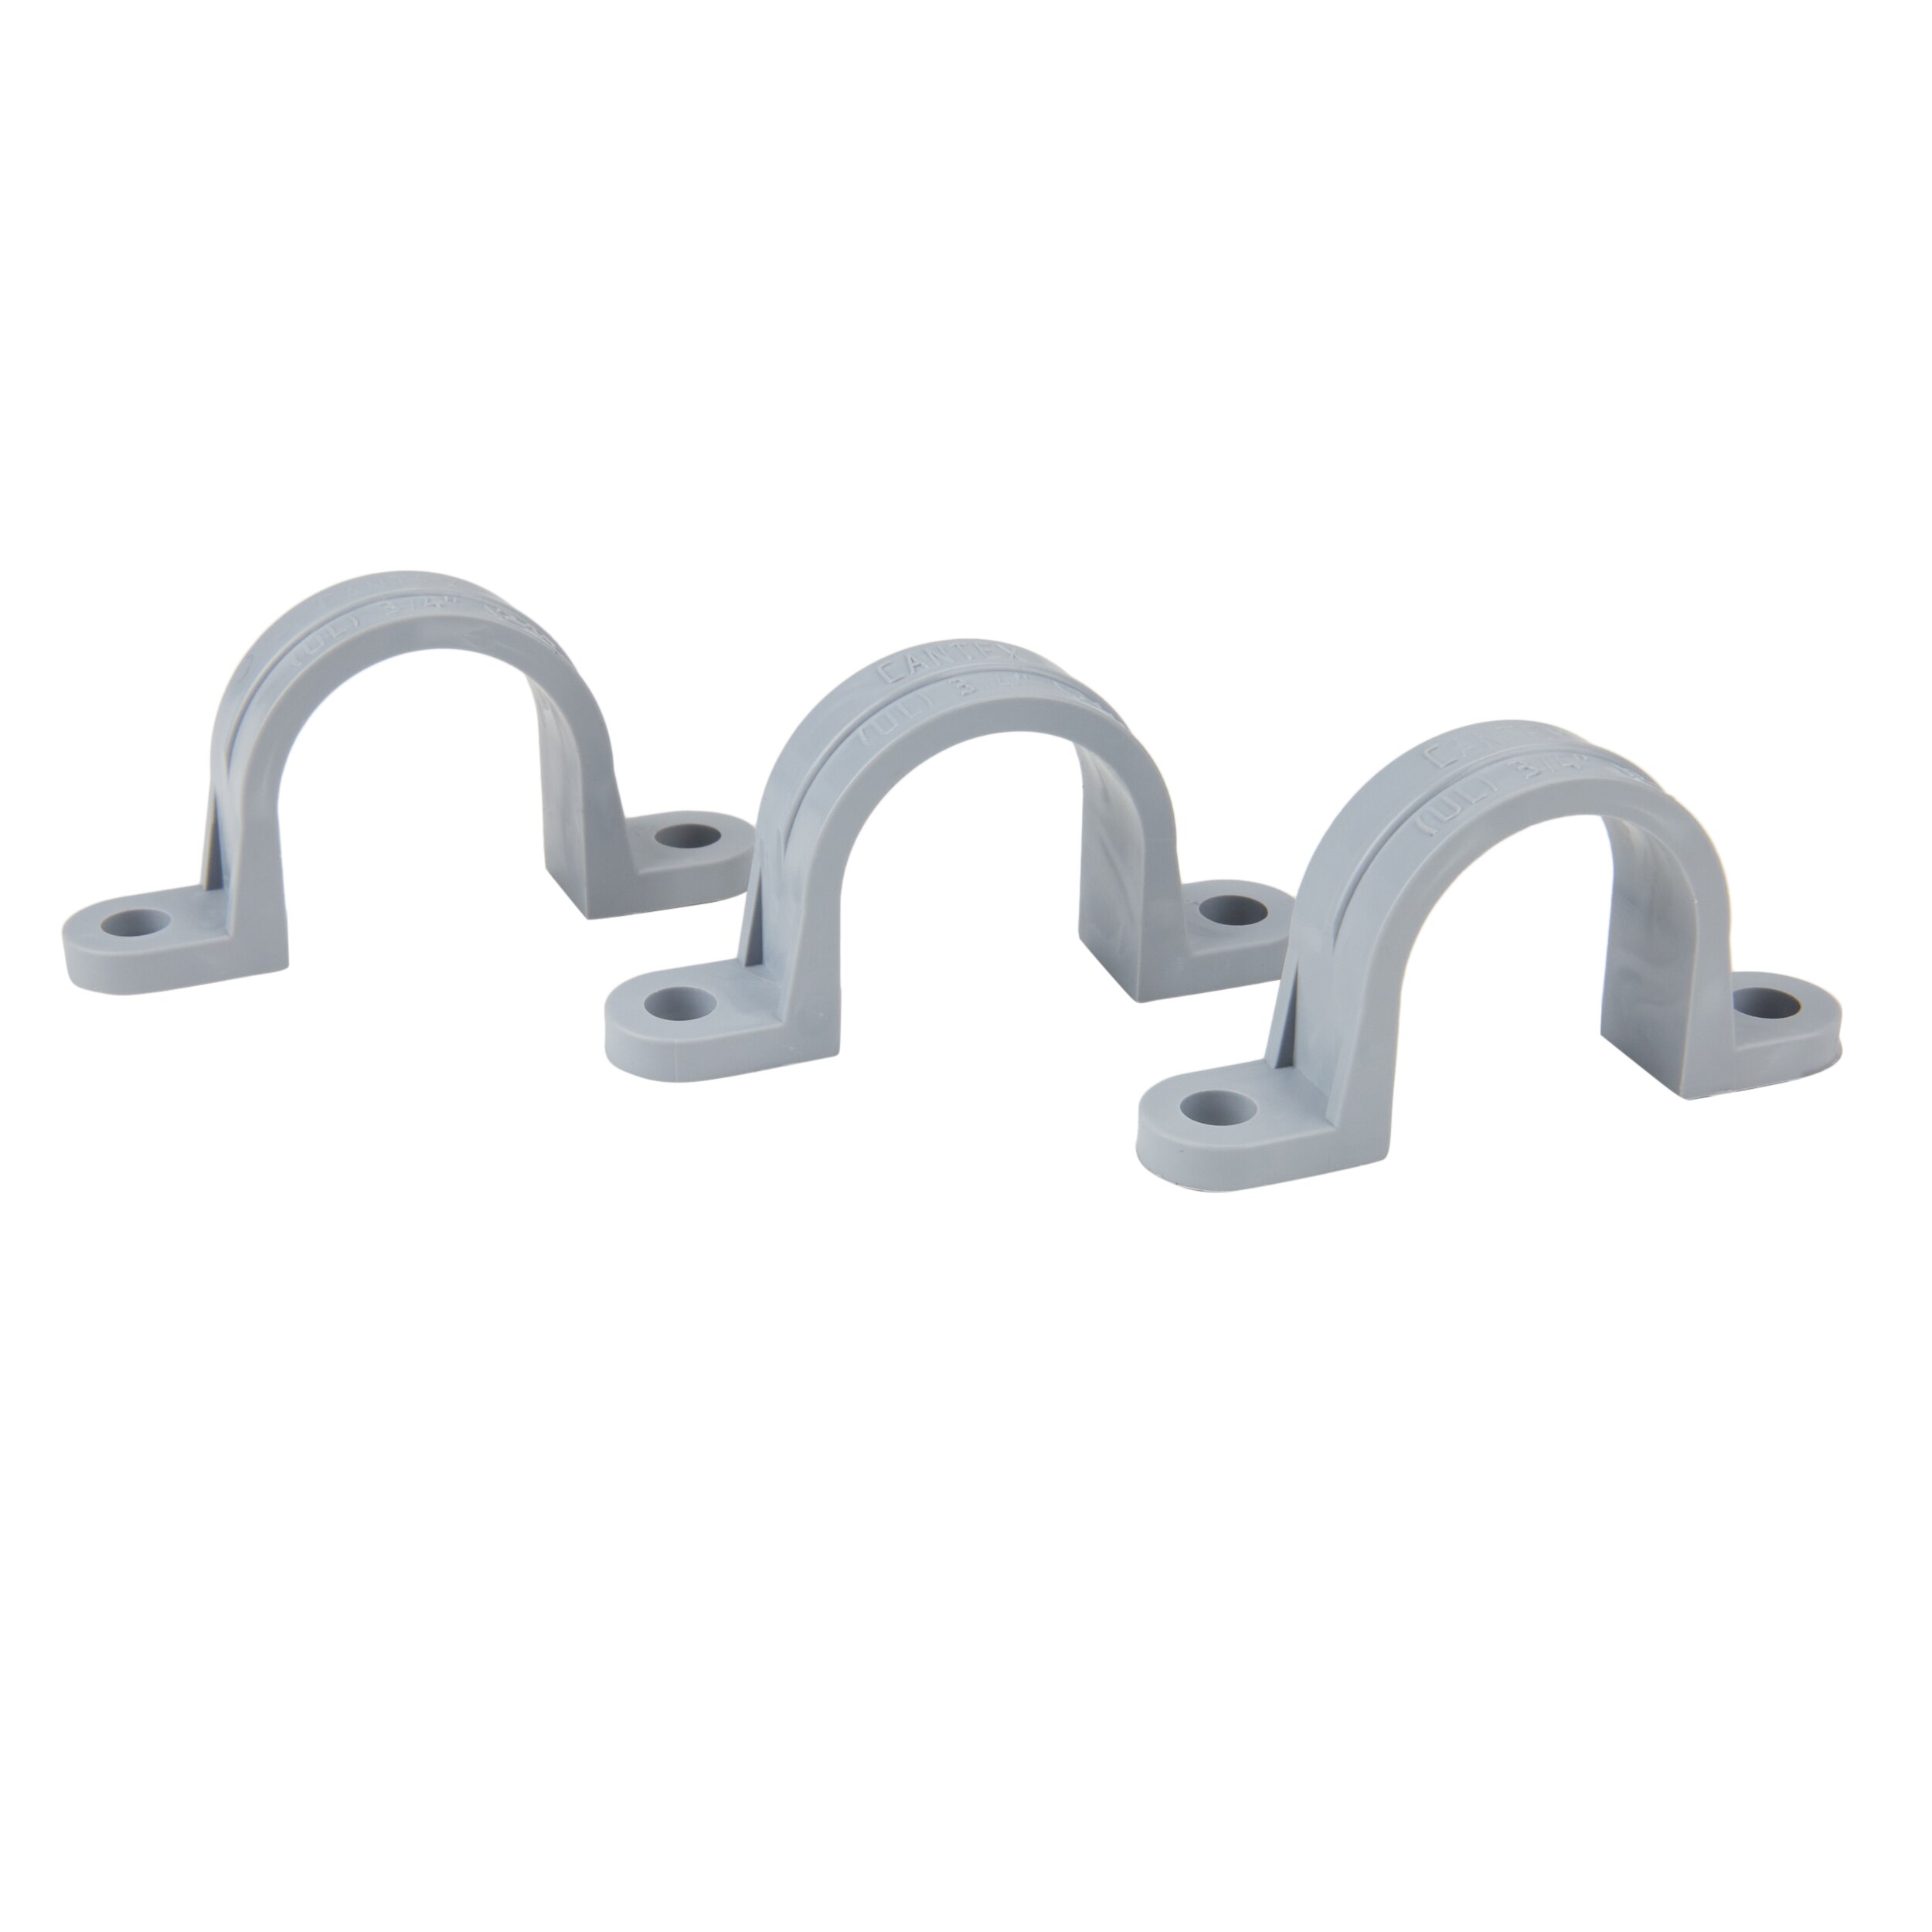 CANTEX 3/4-in Schedule 40 Schedule 80 Plastic Two-hole Clamp Conduit ...